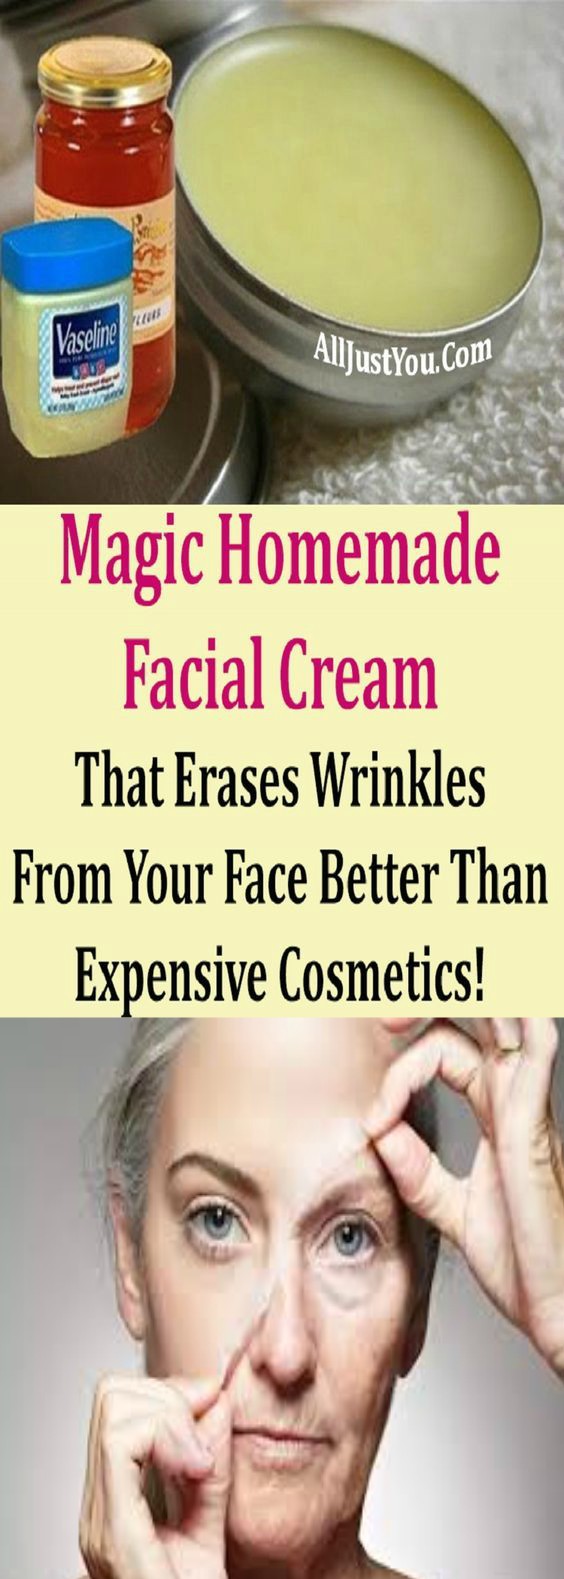 Magic Homemade Facial Cream That Erases Wrinkles From Your Face Better Than Expensive Cosmetics